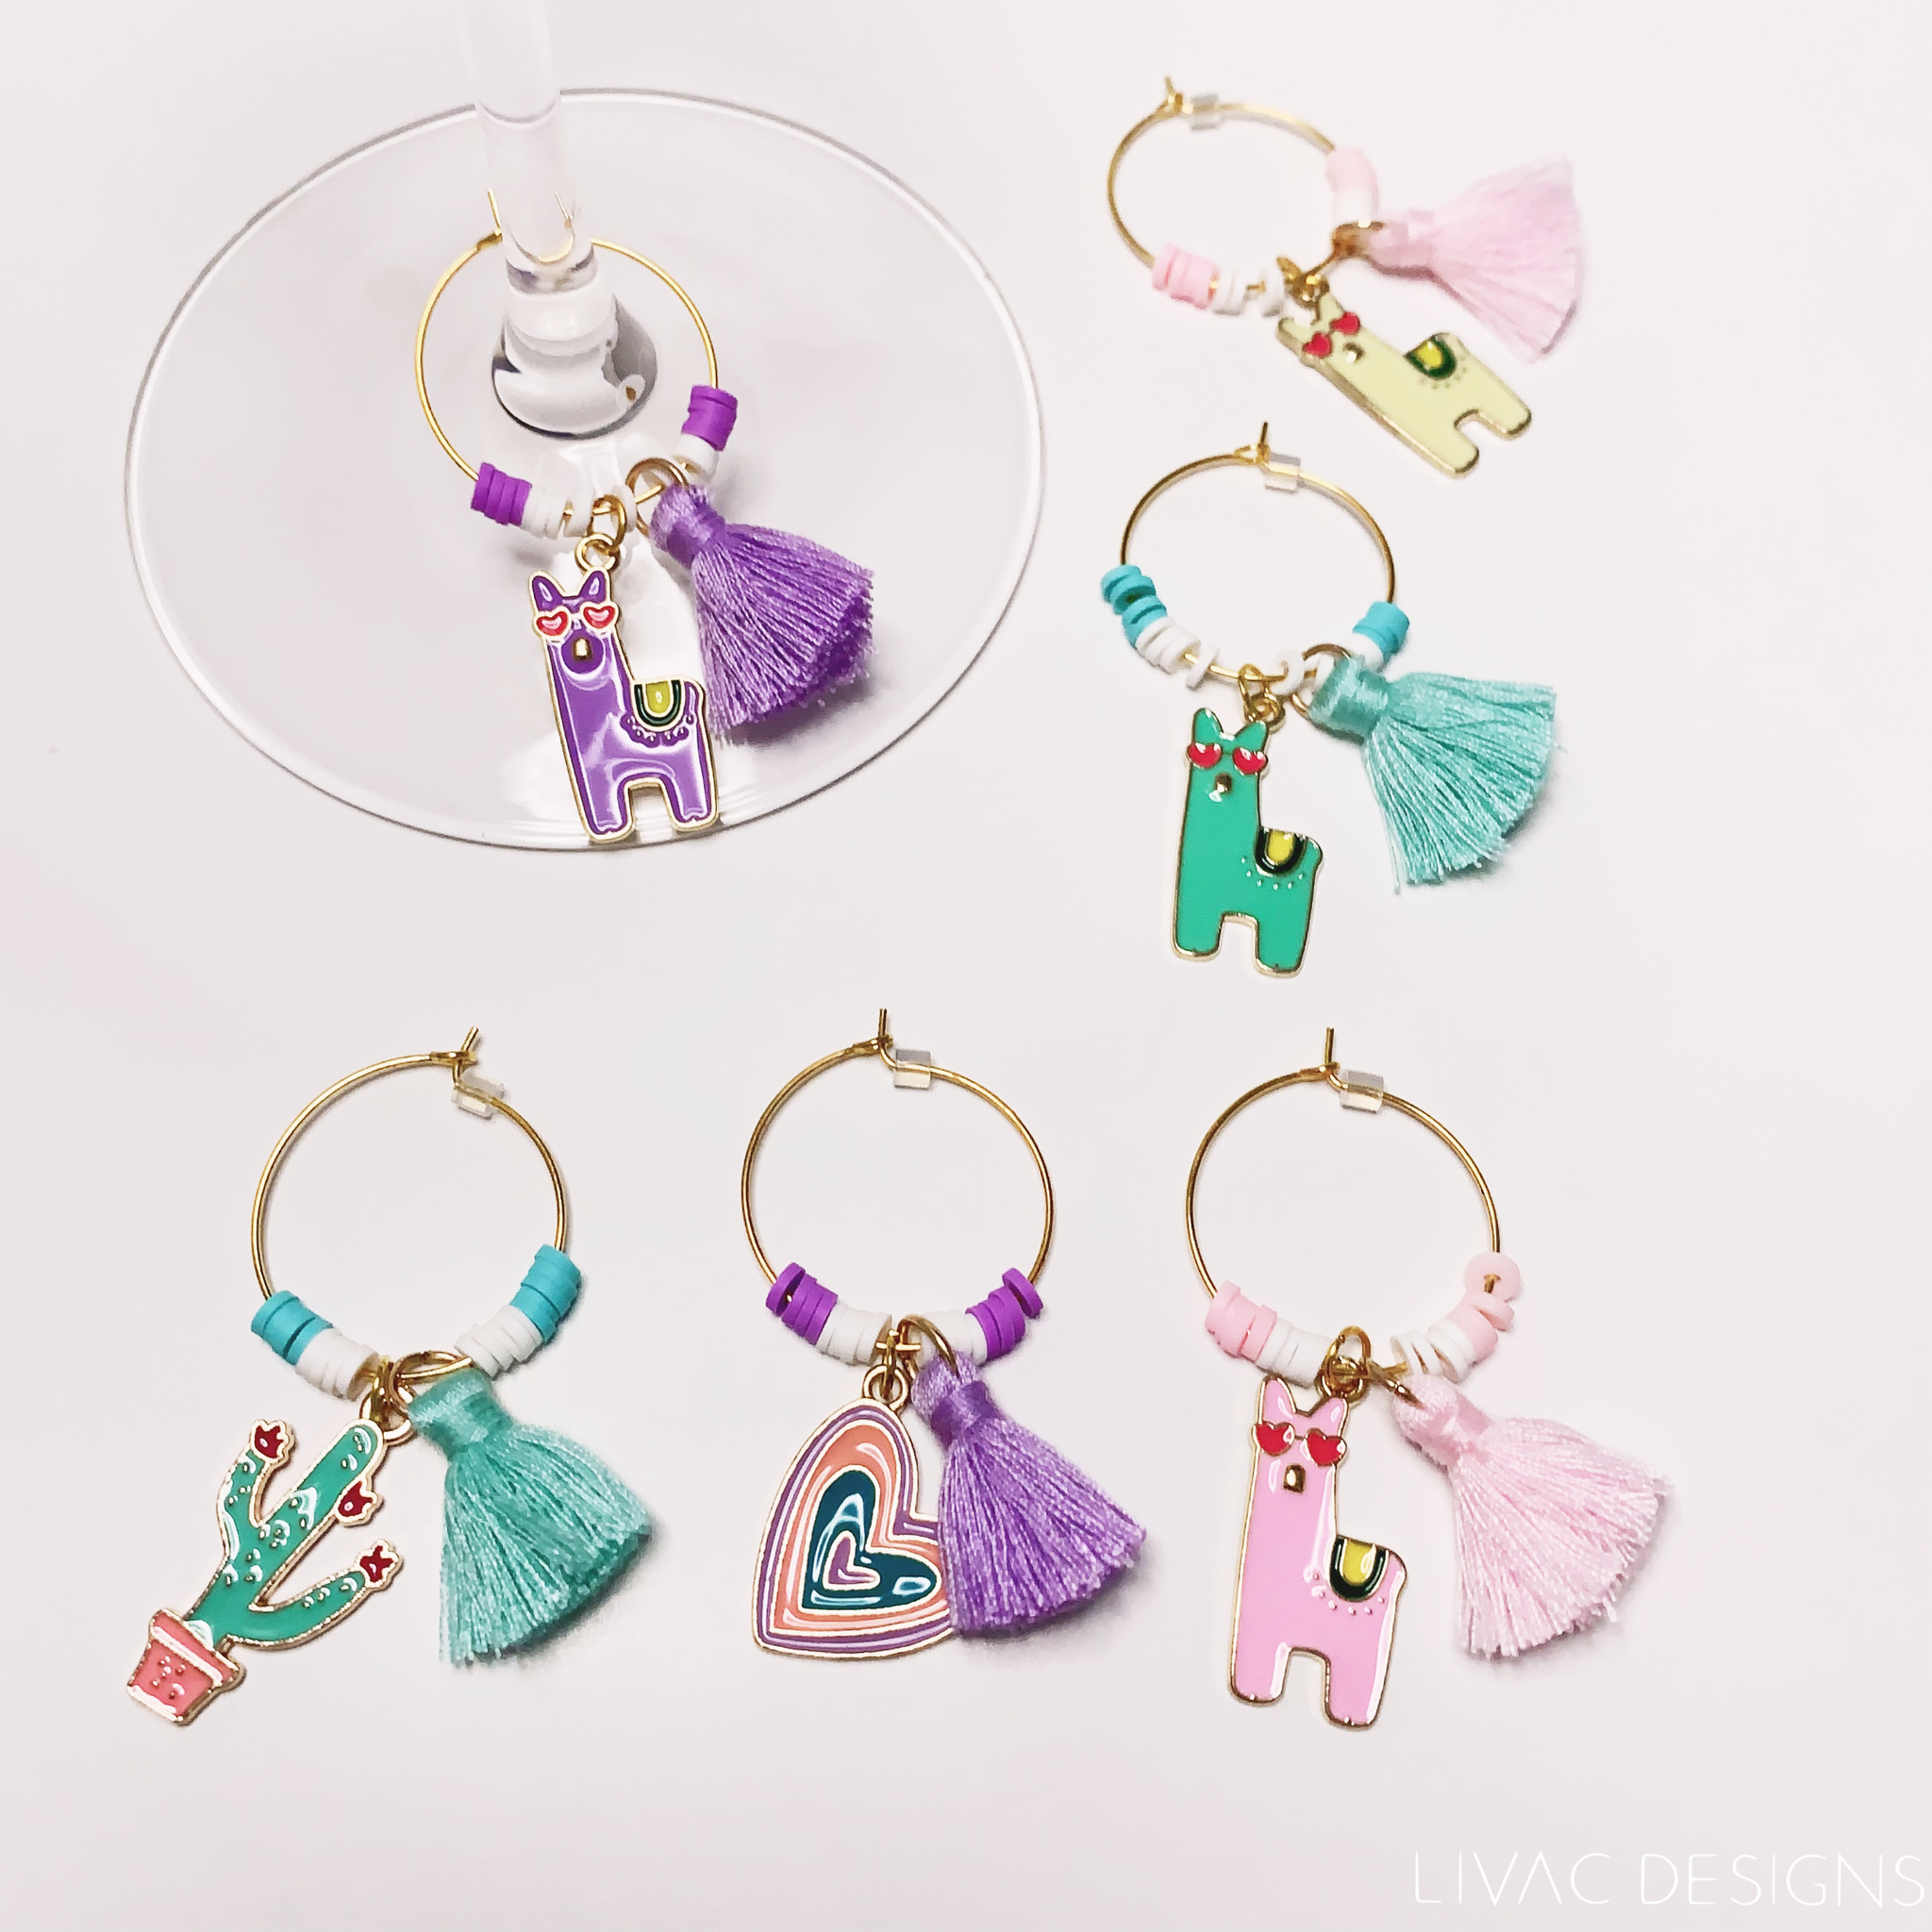 Llama wine glass charms collection